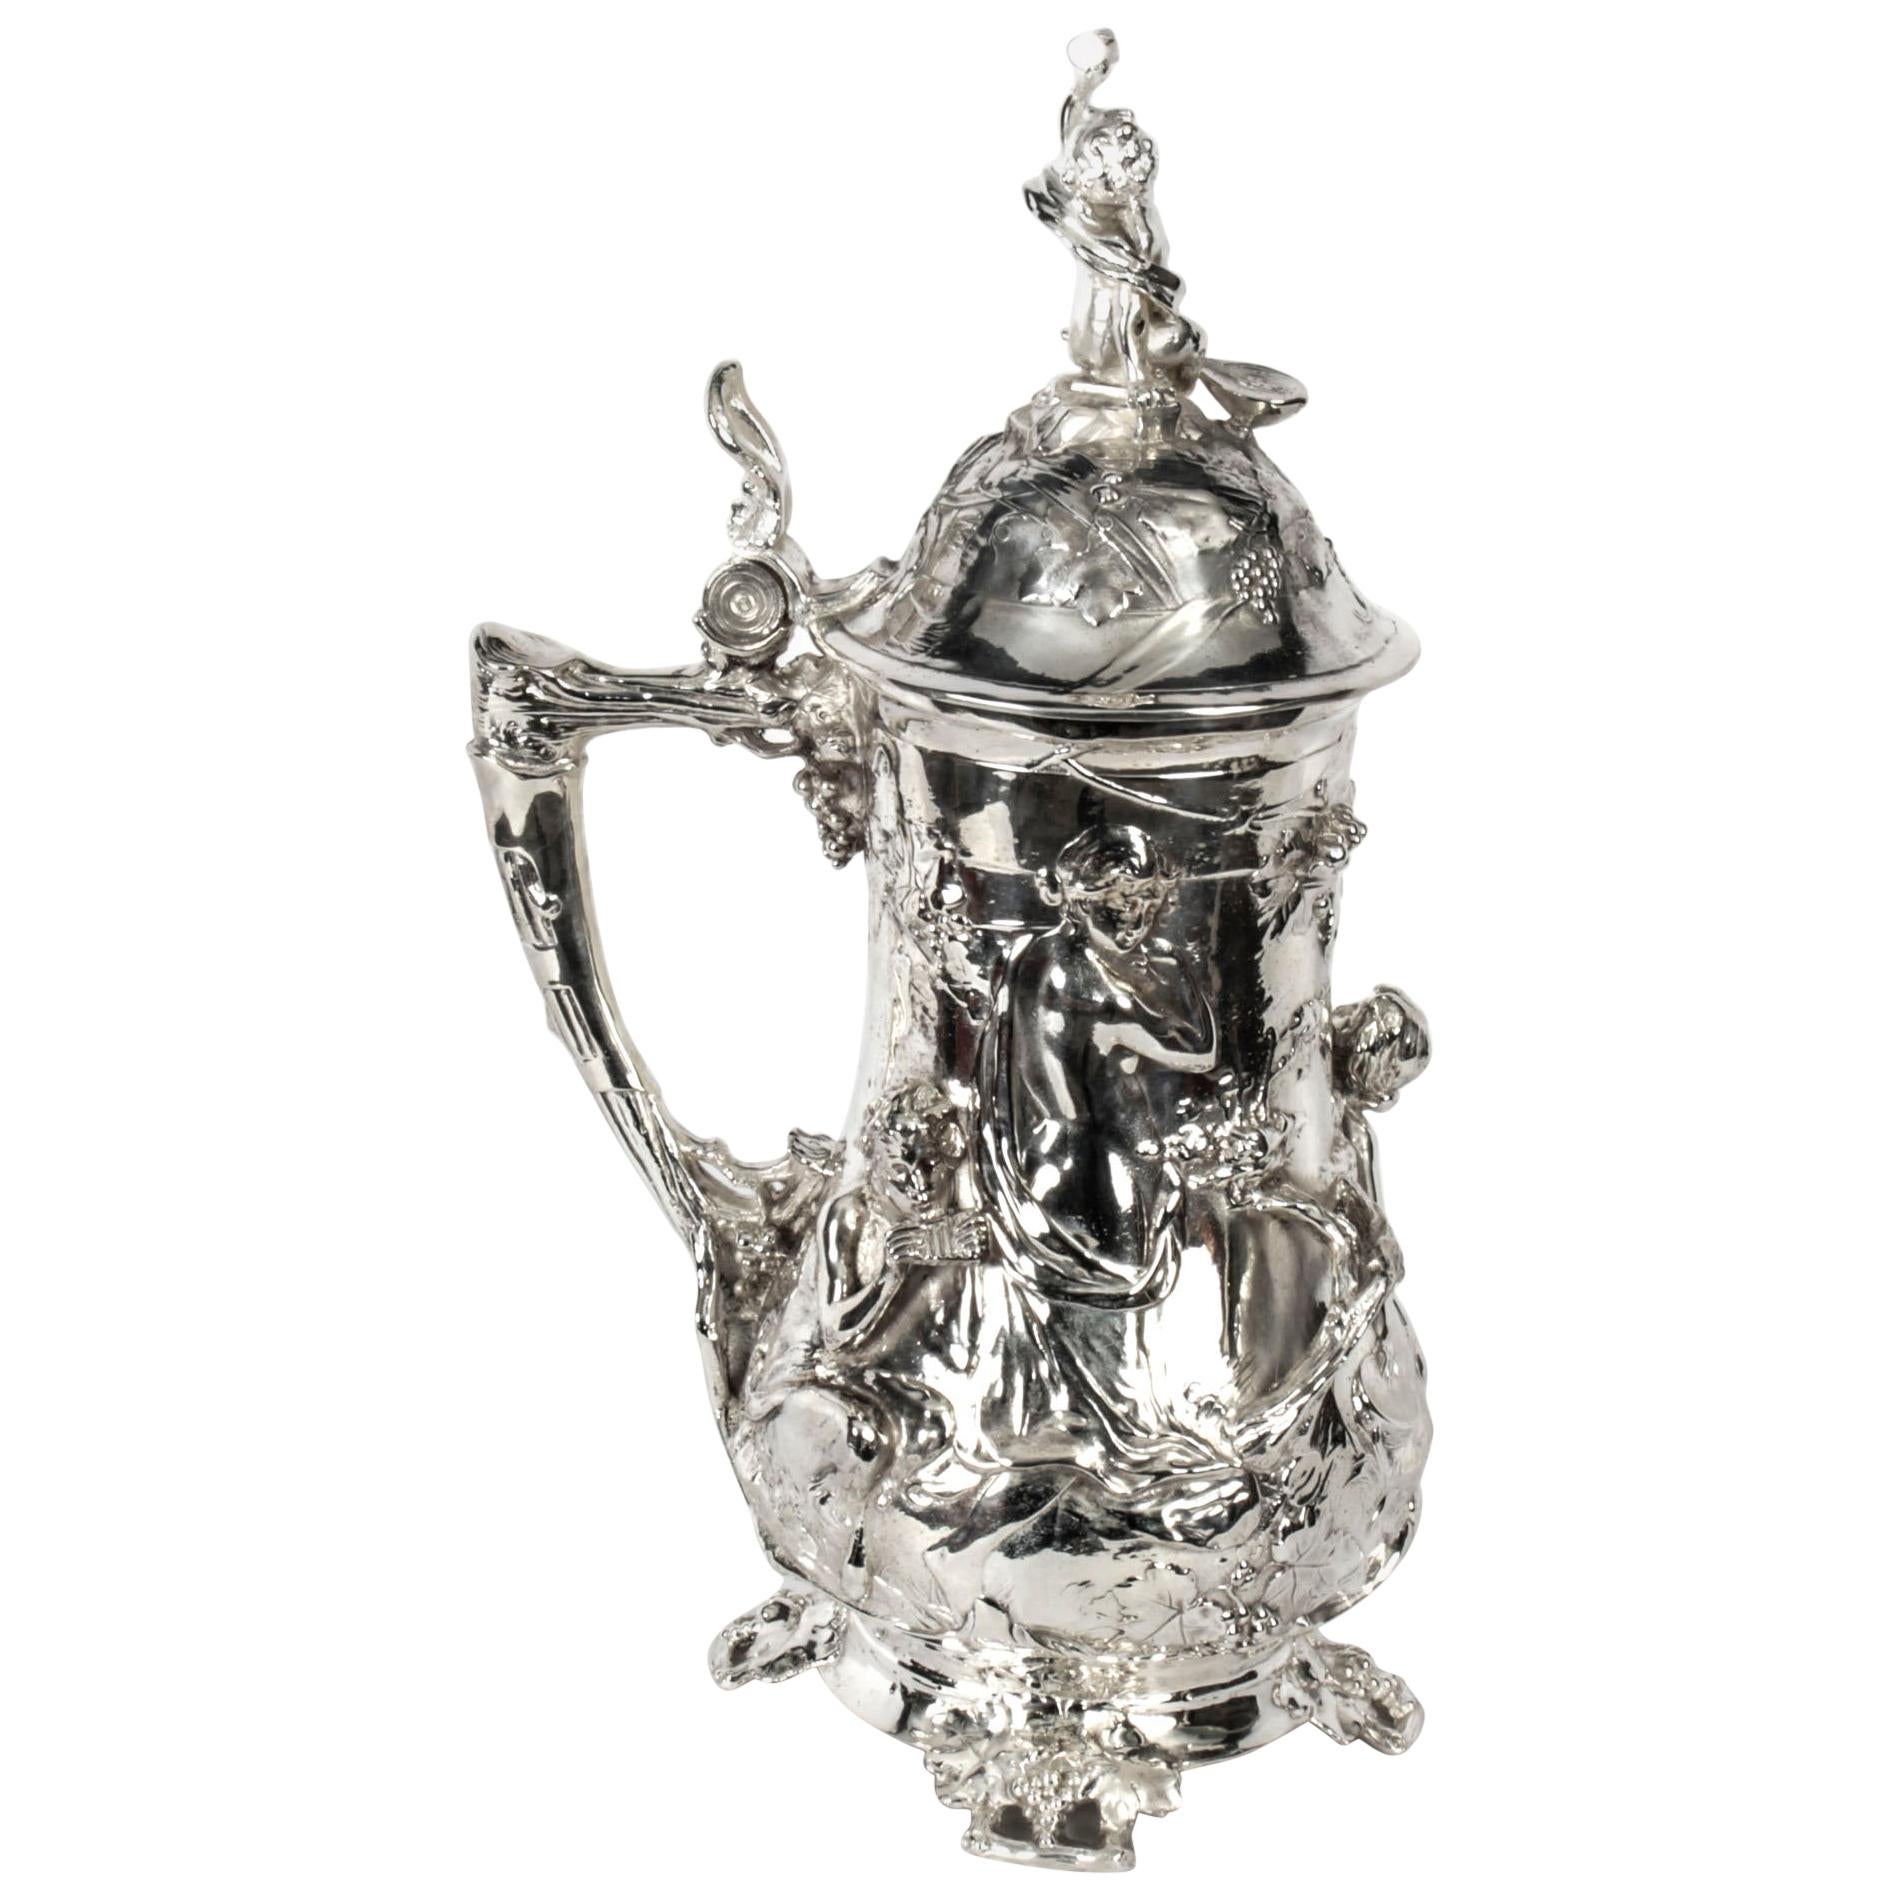 Antique Silver Plated Beer Stein Art Nouveau, 1920s